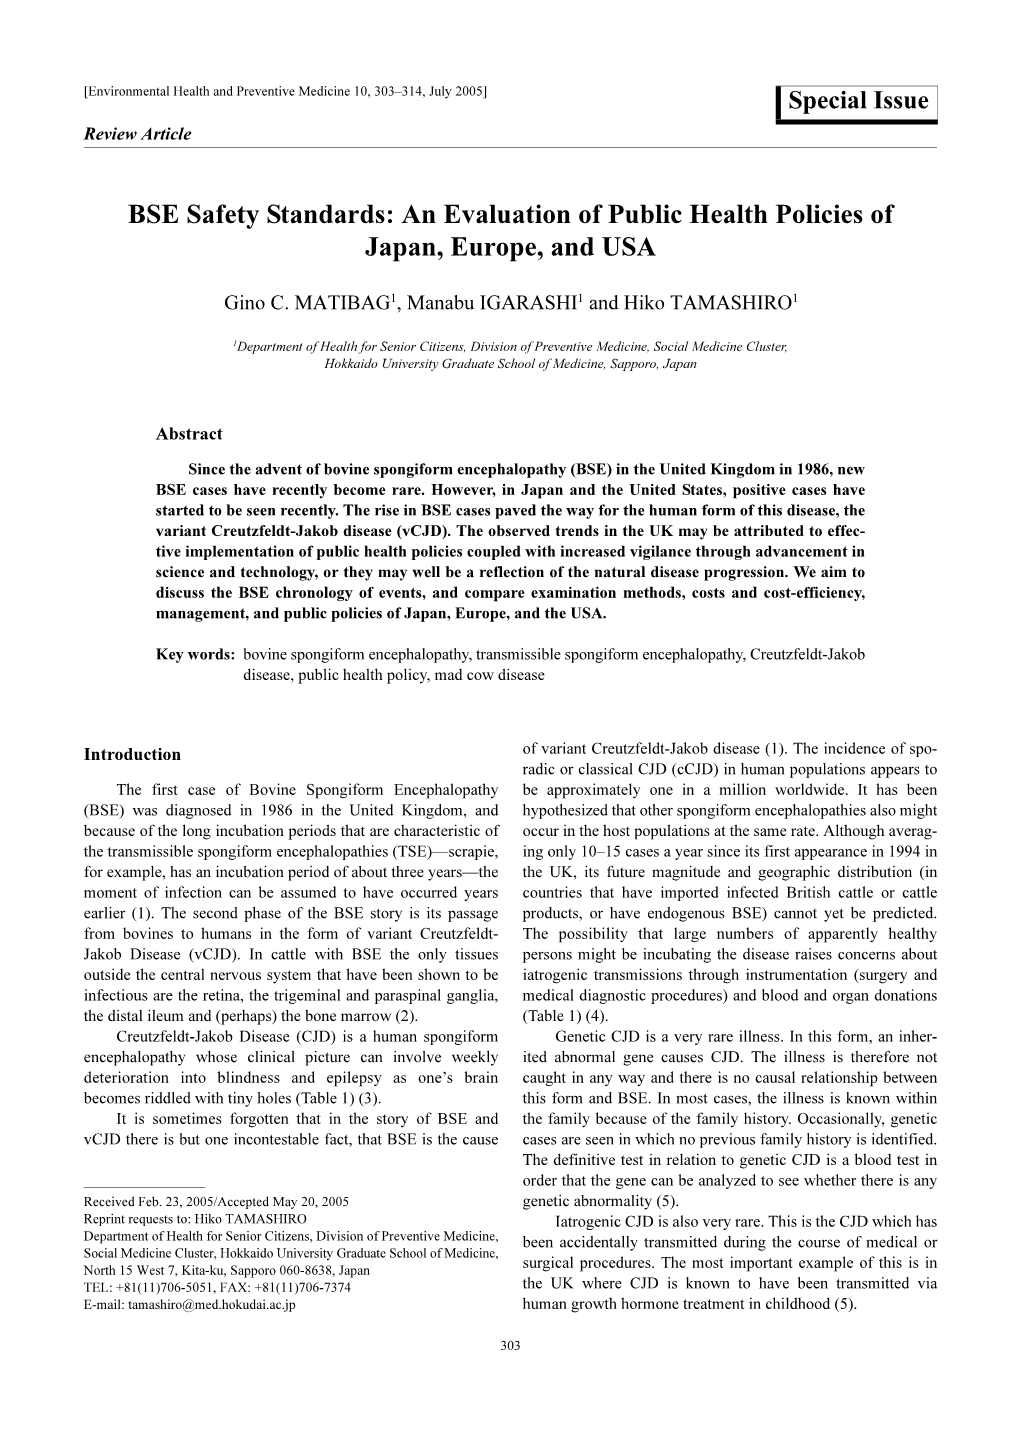 An Evaluation of Public Health Policies of Japan, Europe, and USA